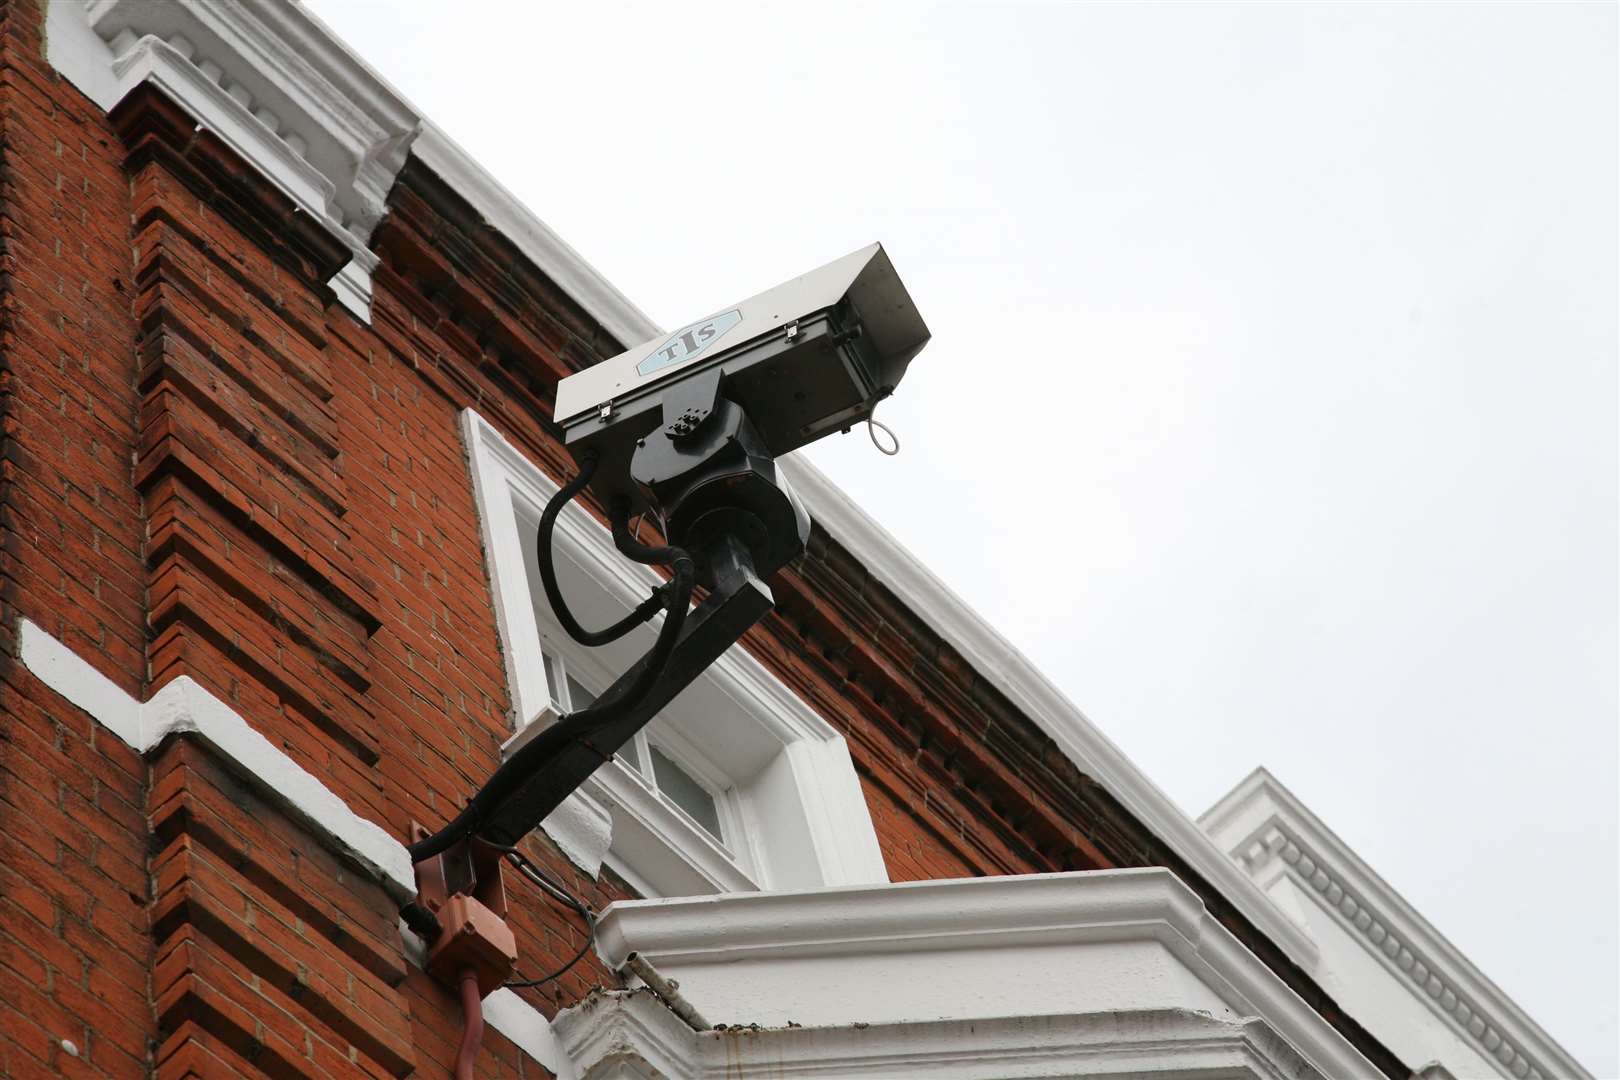 Councils will use cameras to fine drivers for moving traffic offences